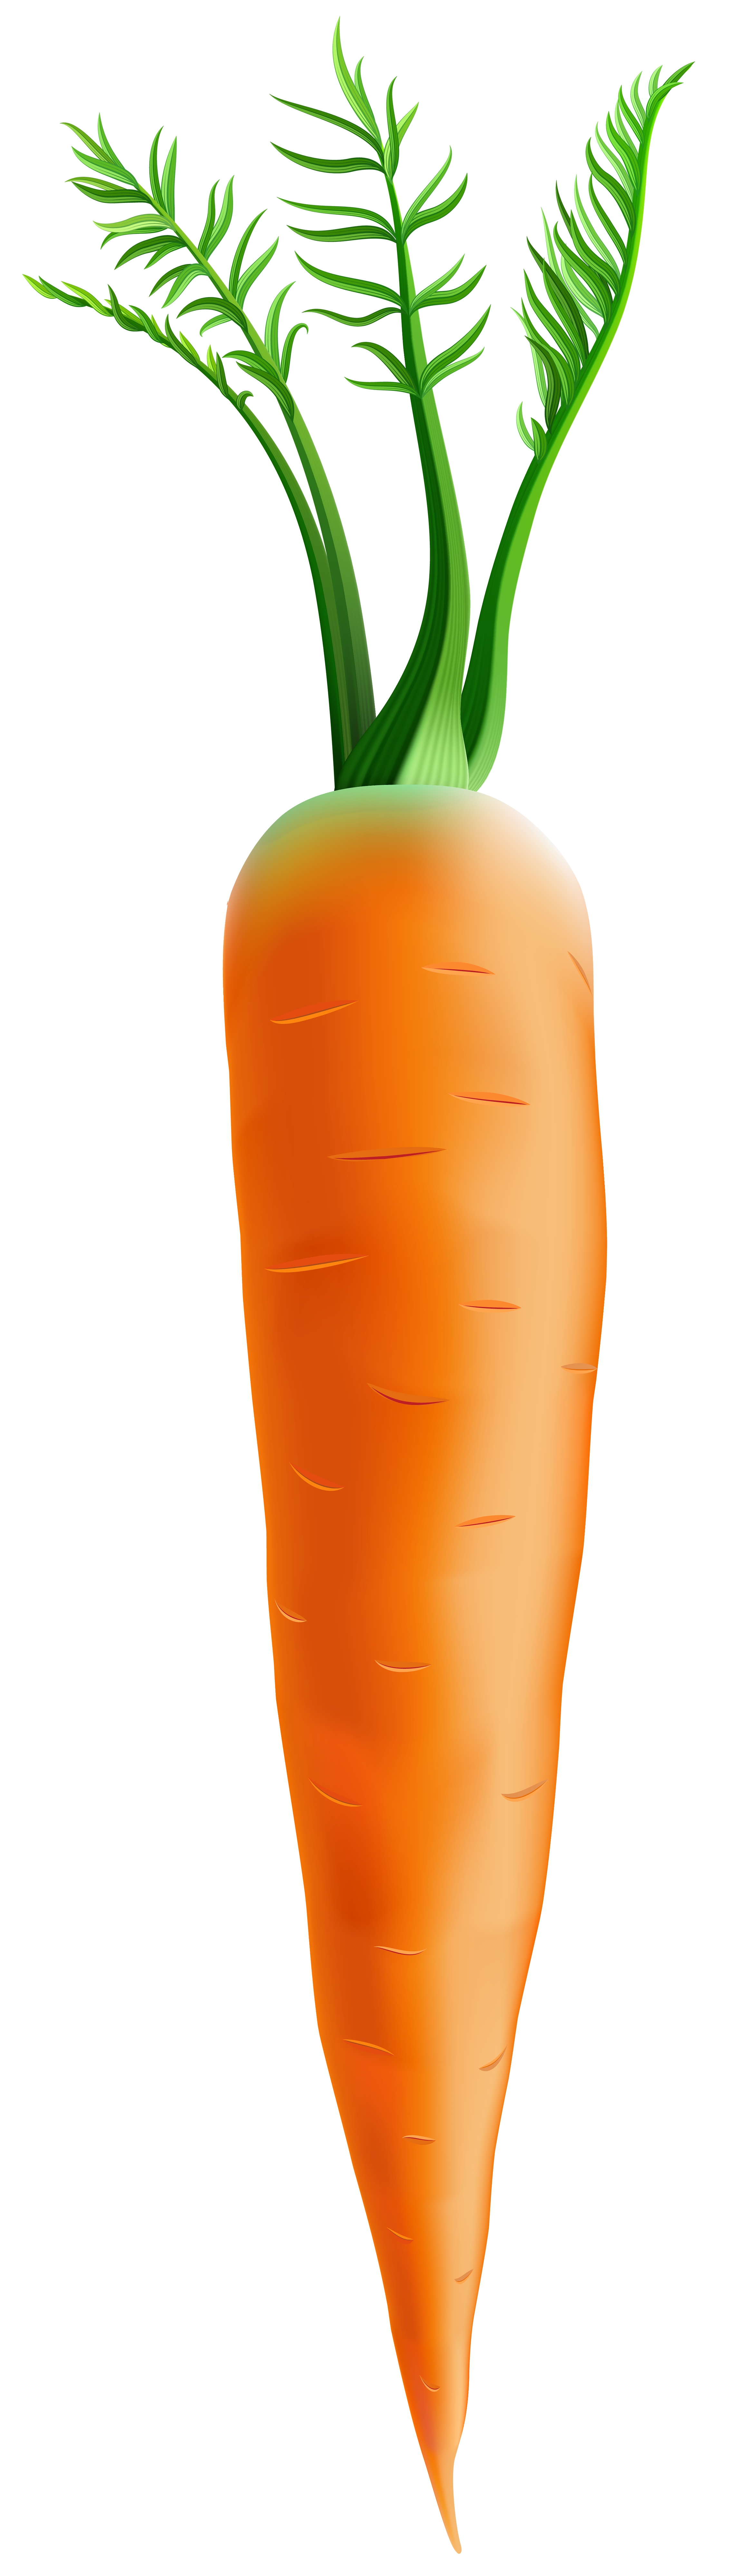 Free Downloadable Clipart Carrots